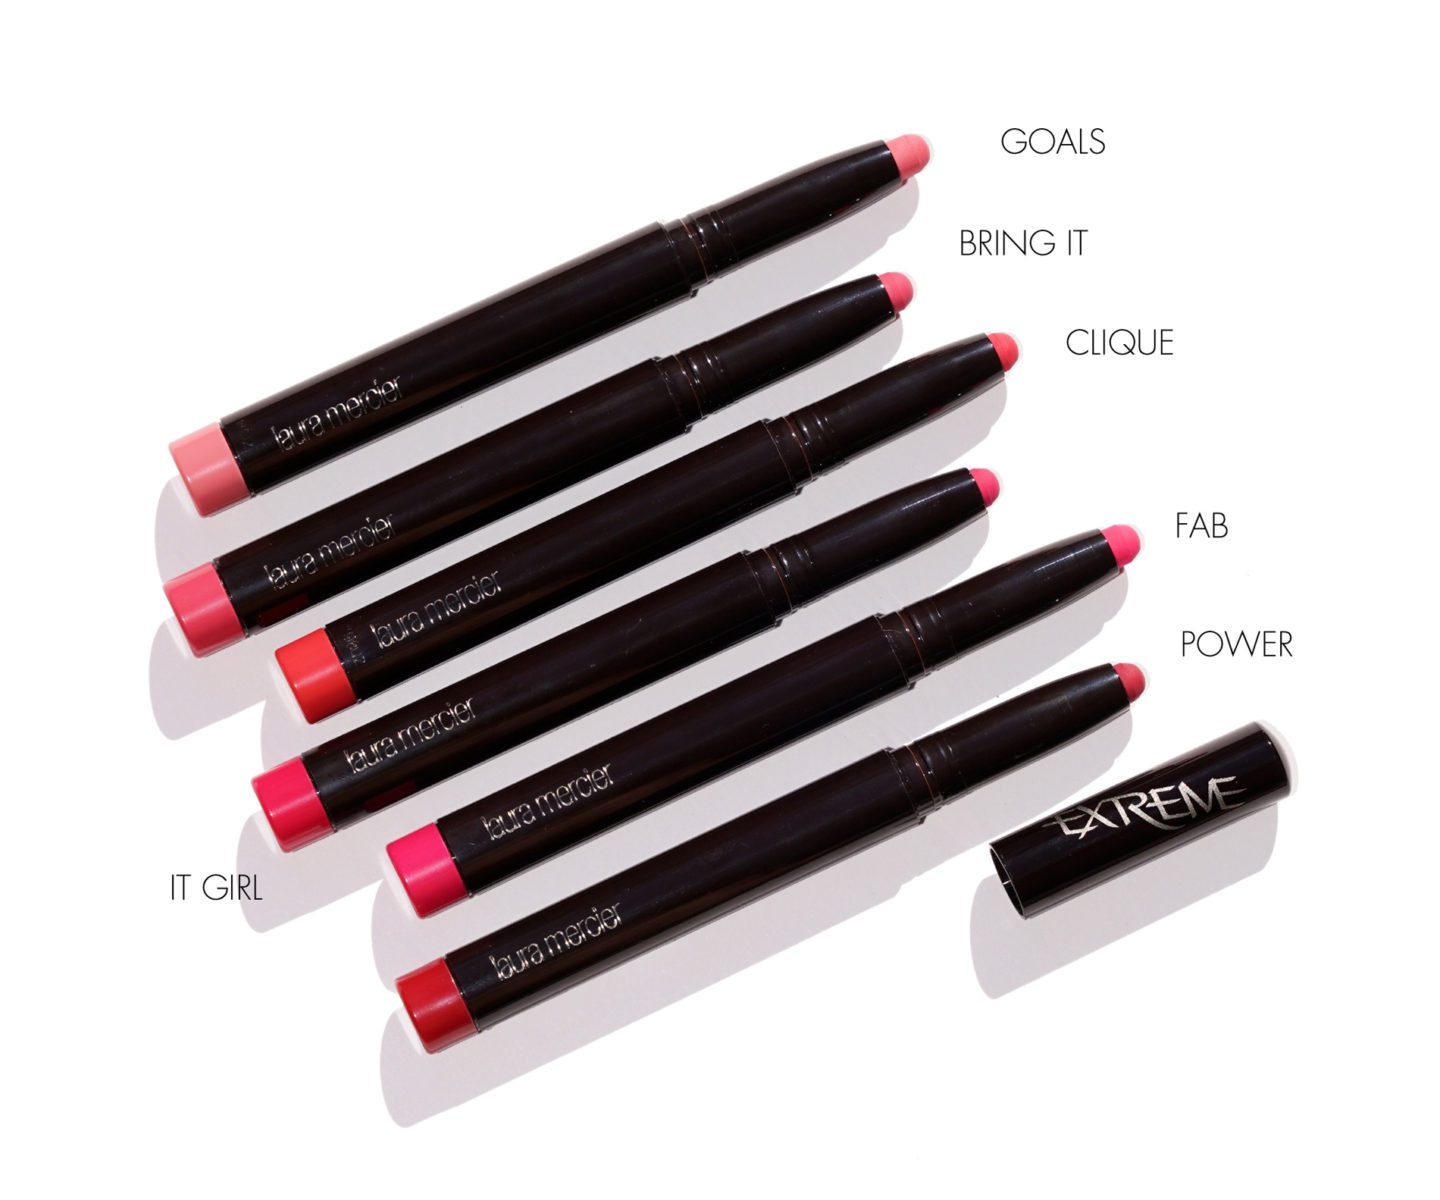 Laura Mercier Velour Extreme Goals, Bring It, Clique, It Girl, Fab and Power